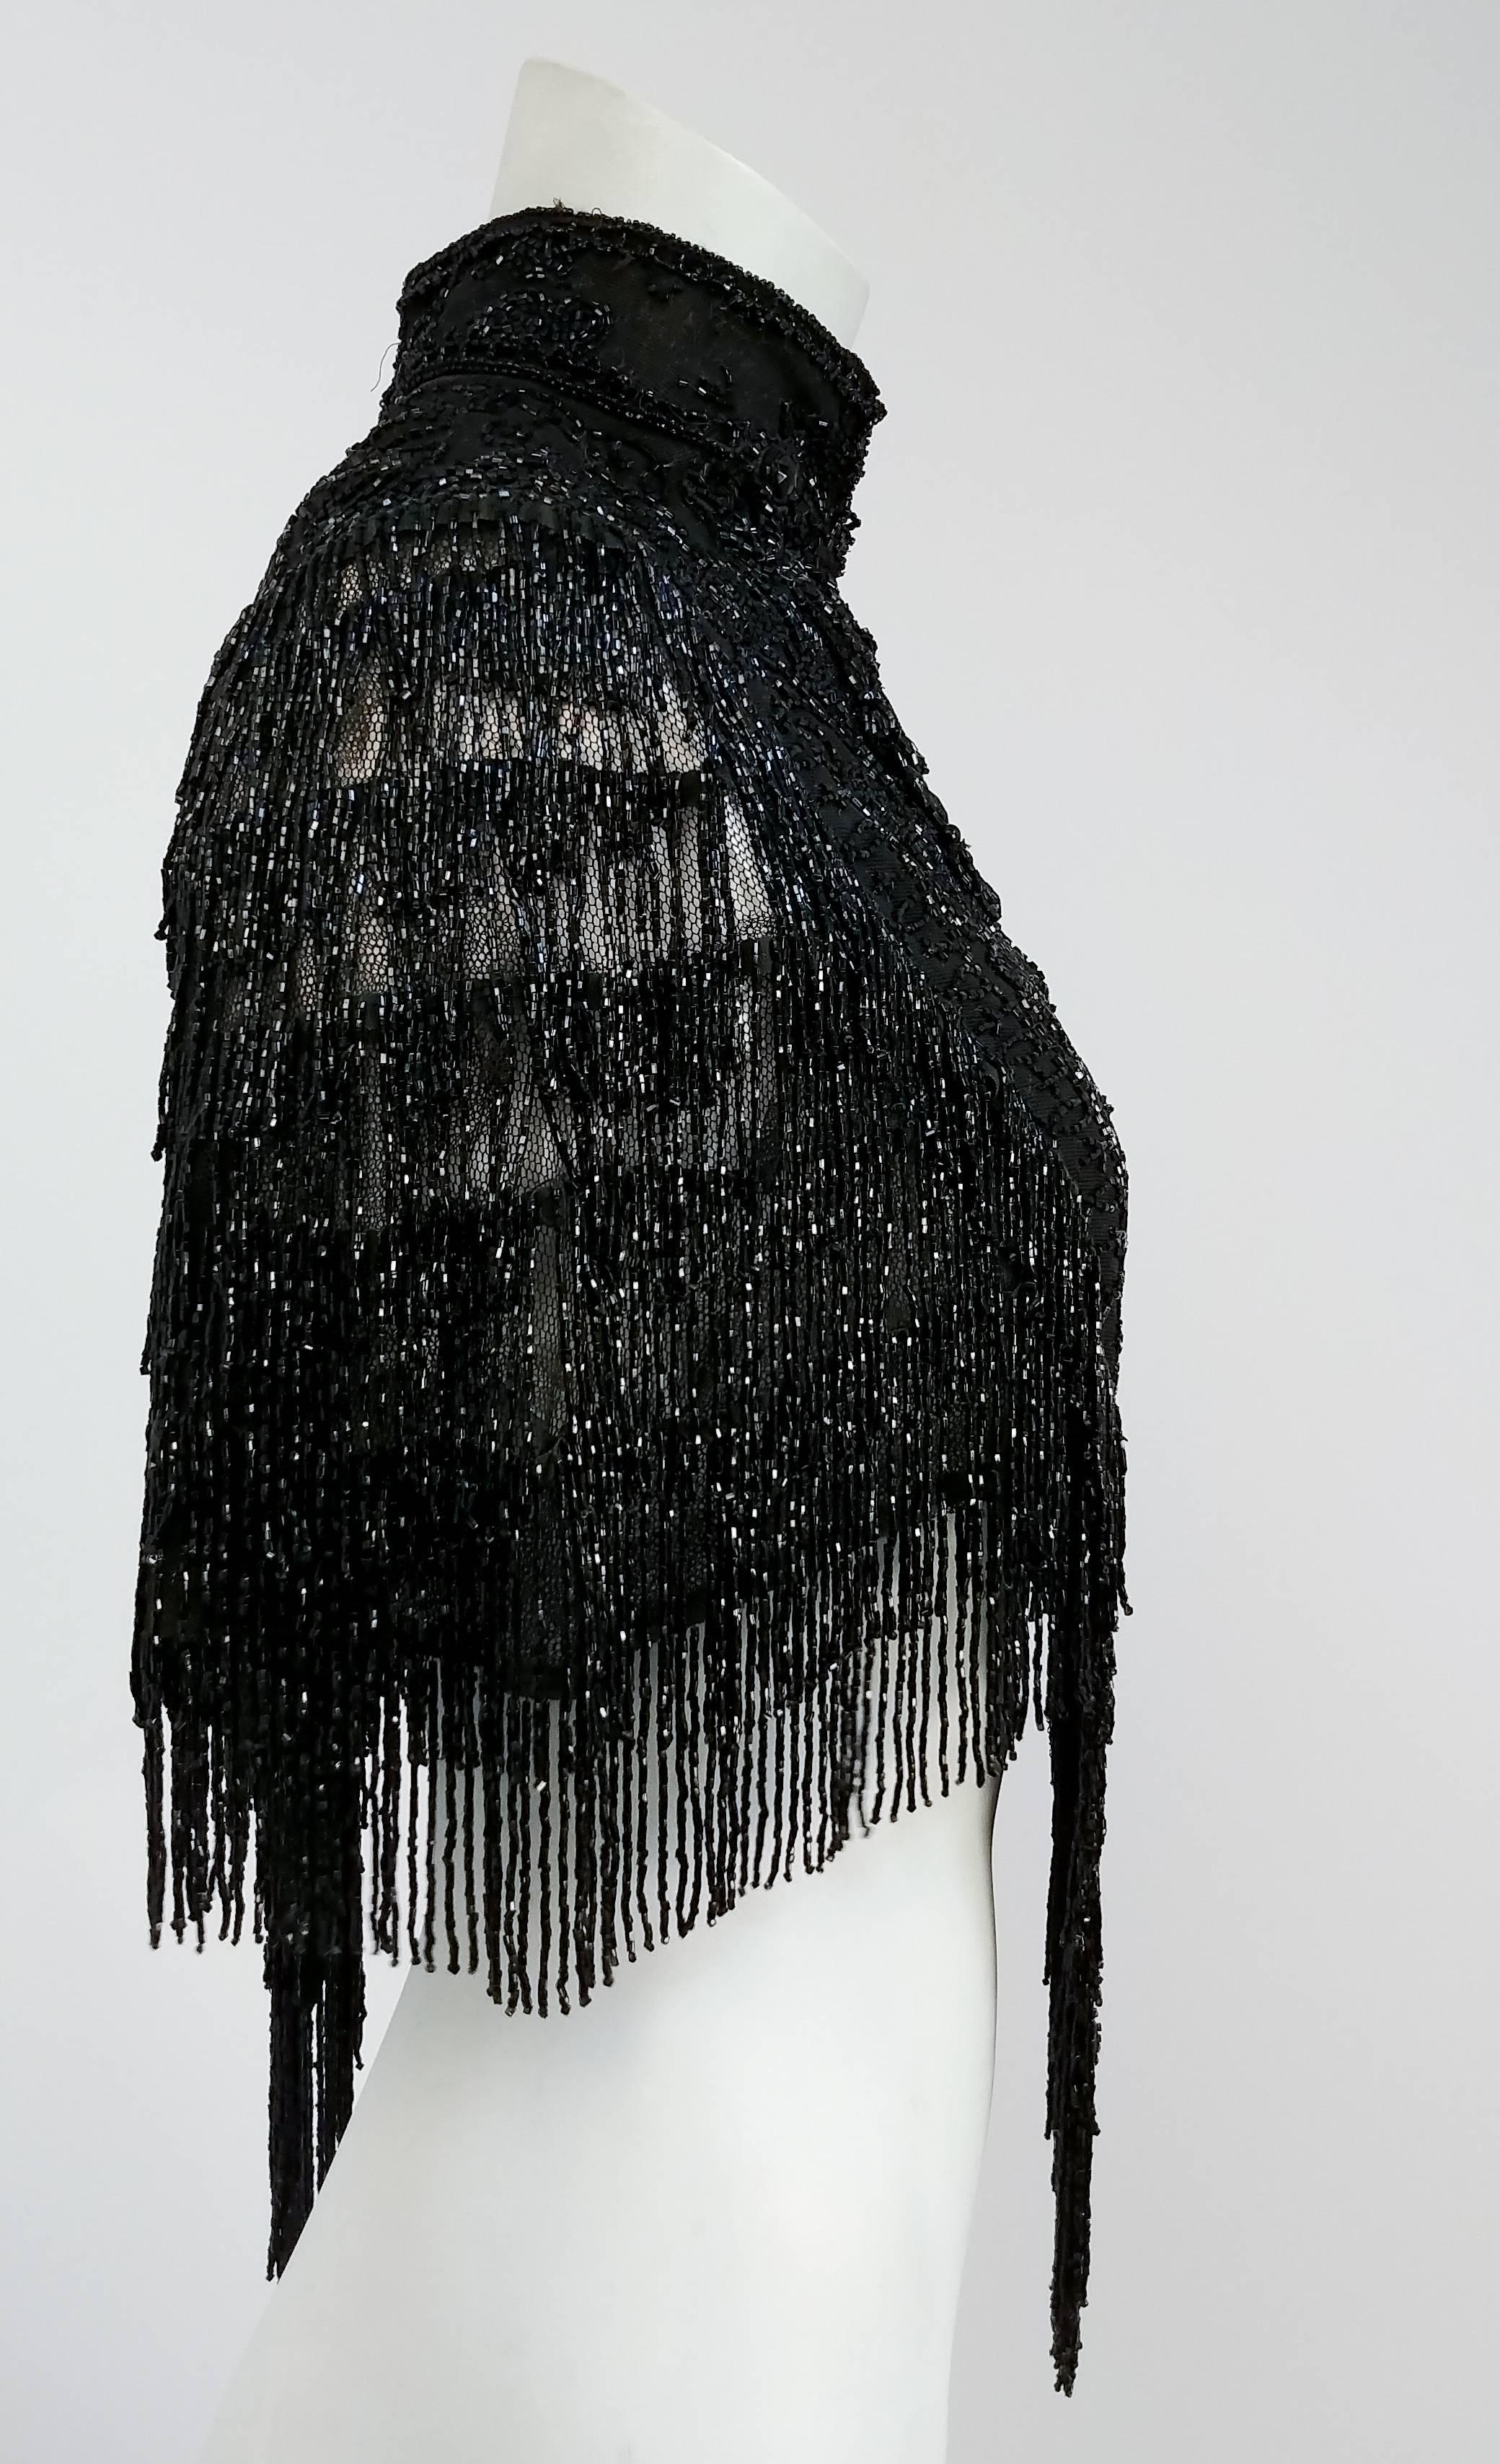 Victorian Jet Bead Capelet w/ Fringe. Clasps in front w/ hook and eyes. Small shoulders. Wool lining on neck, beaded on mesh. 